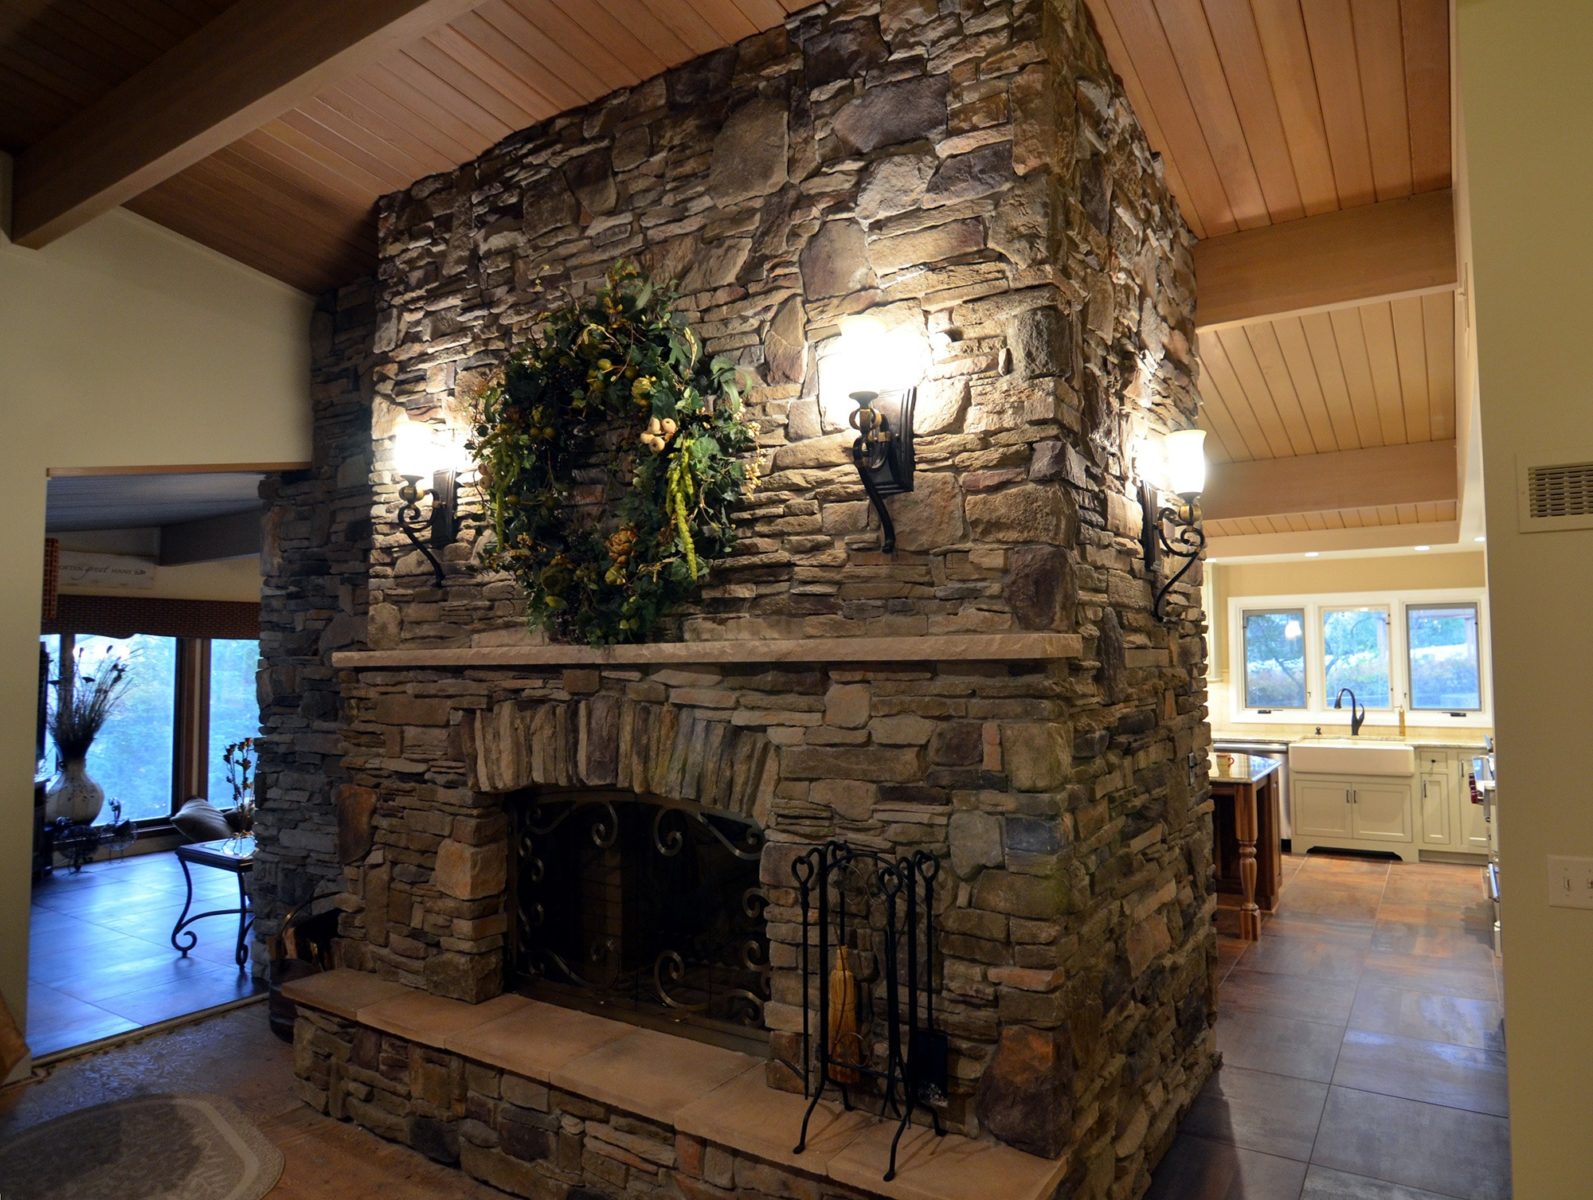 Large stonework fireplace with mantle and hallways leading to kitchen and living room